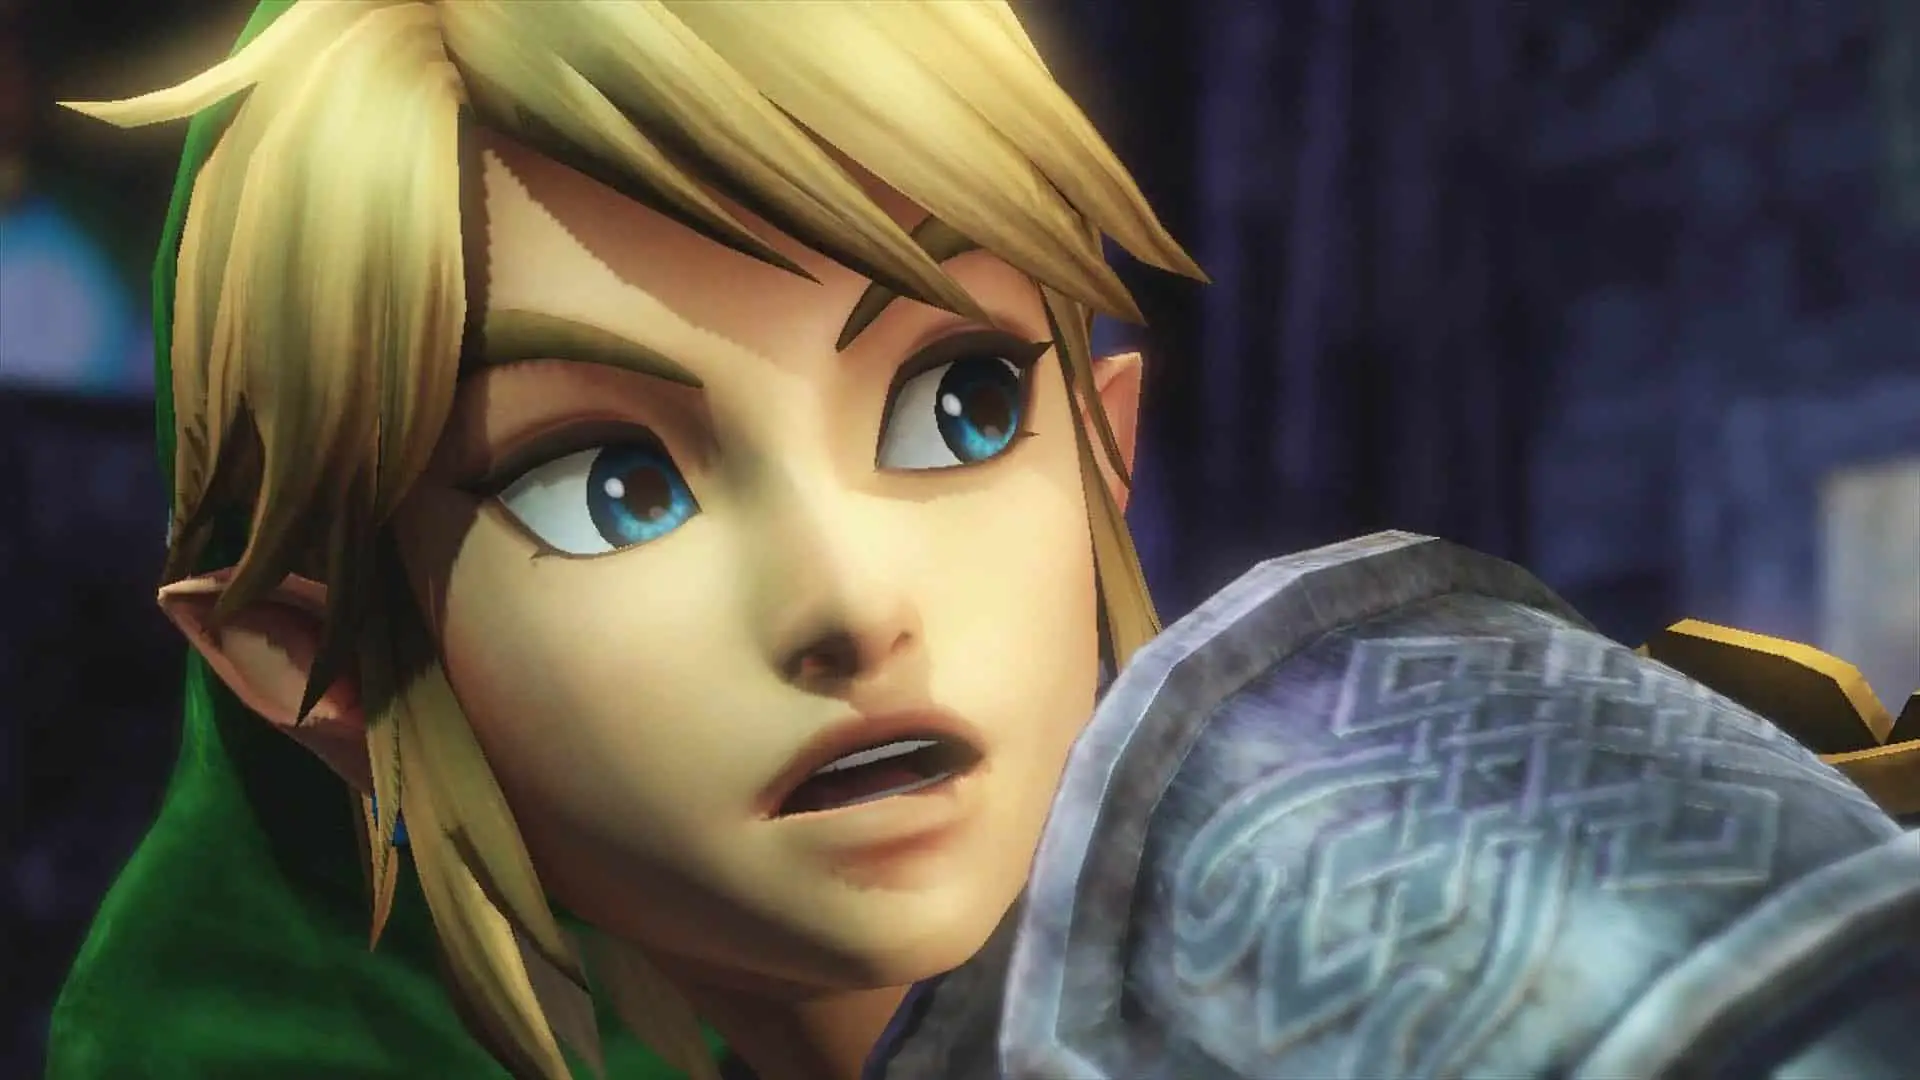 close up on link's face looking suprised